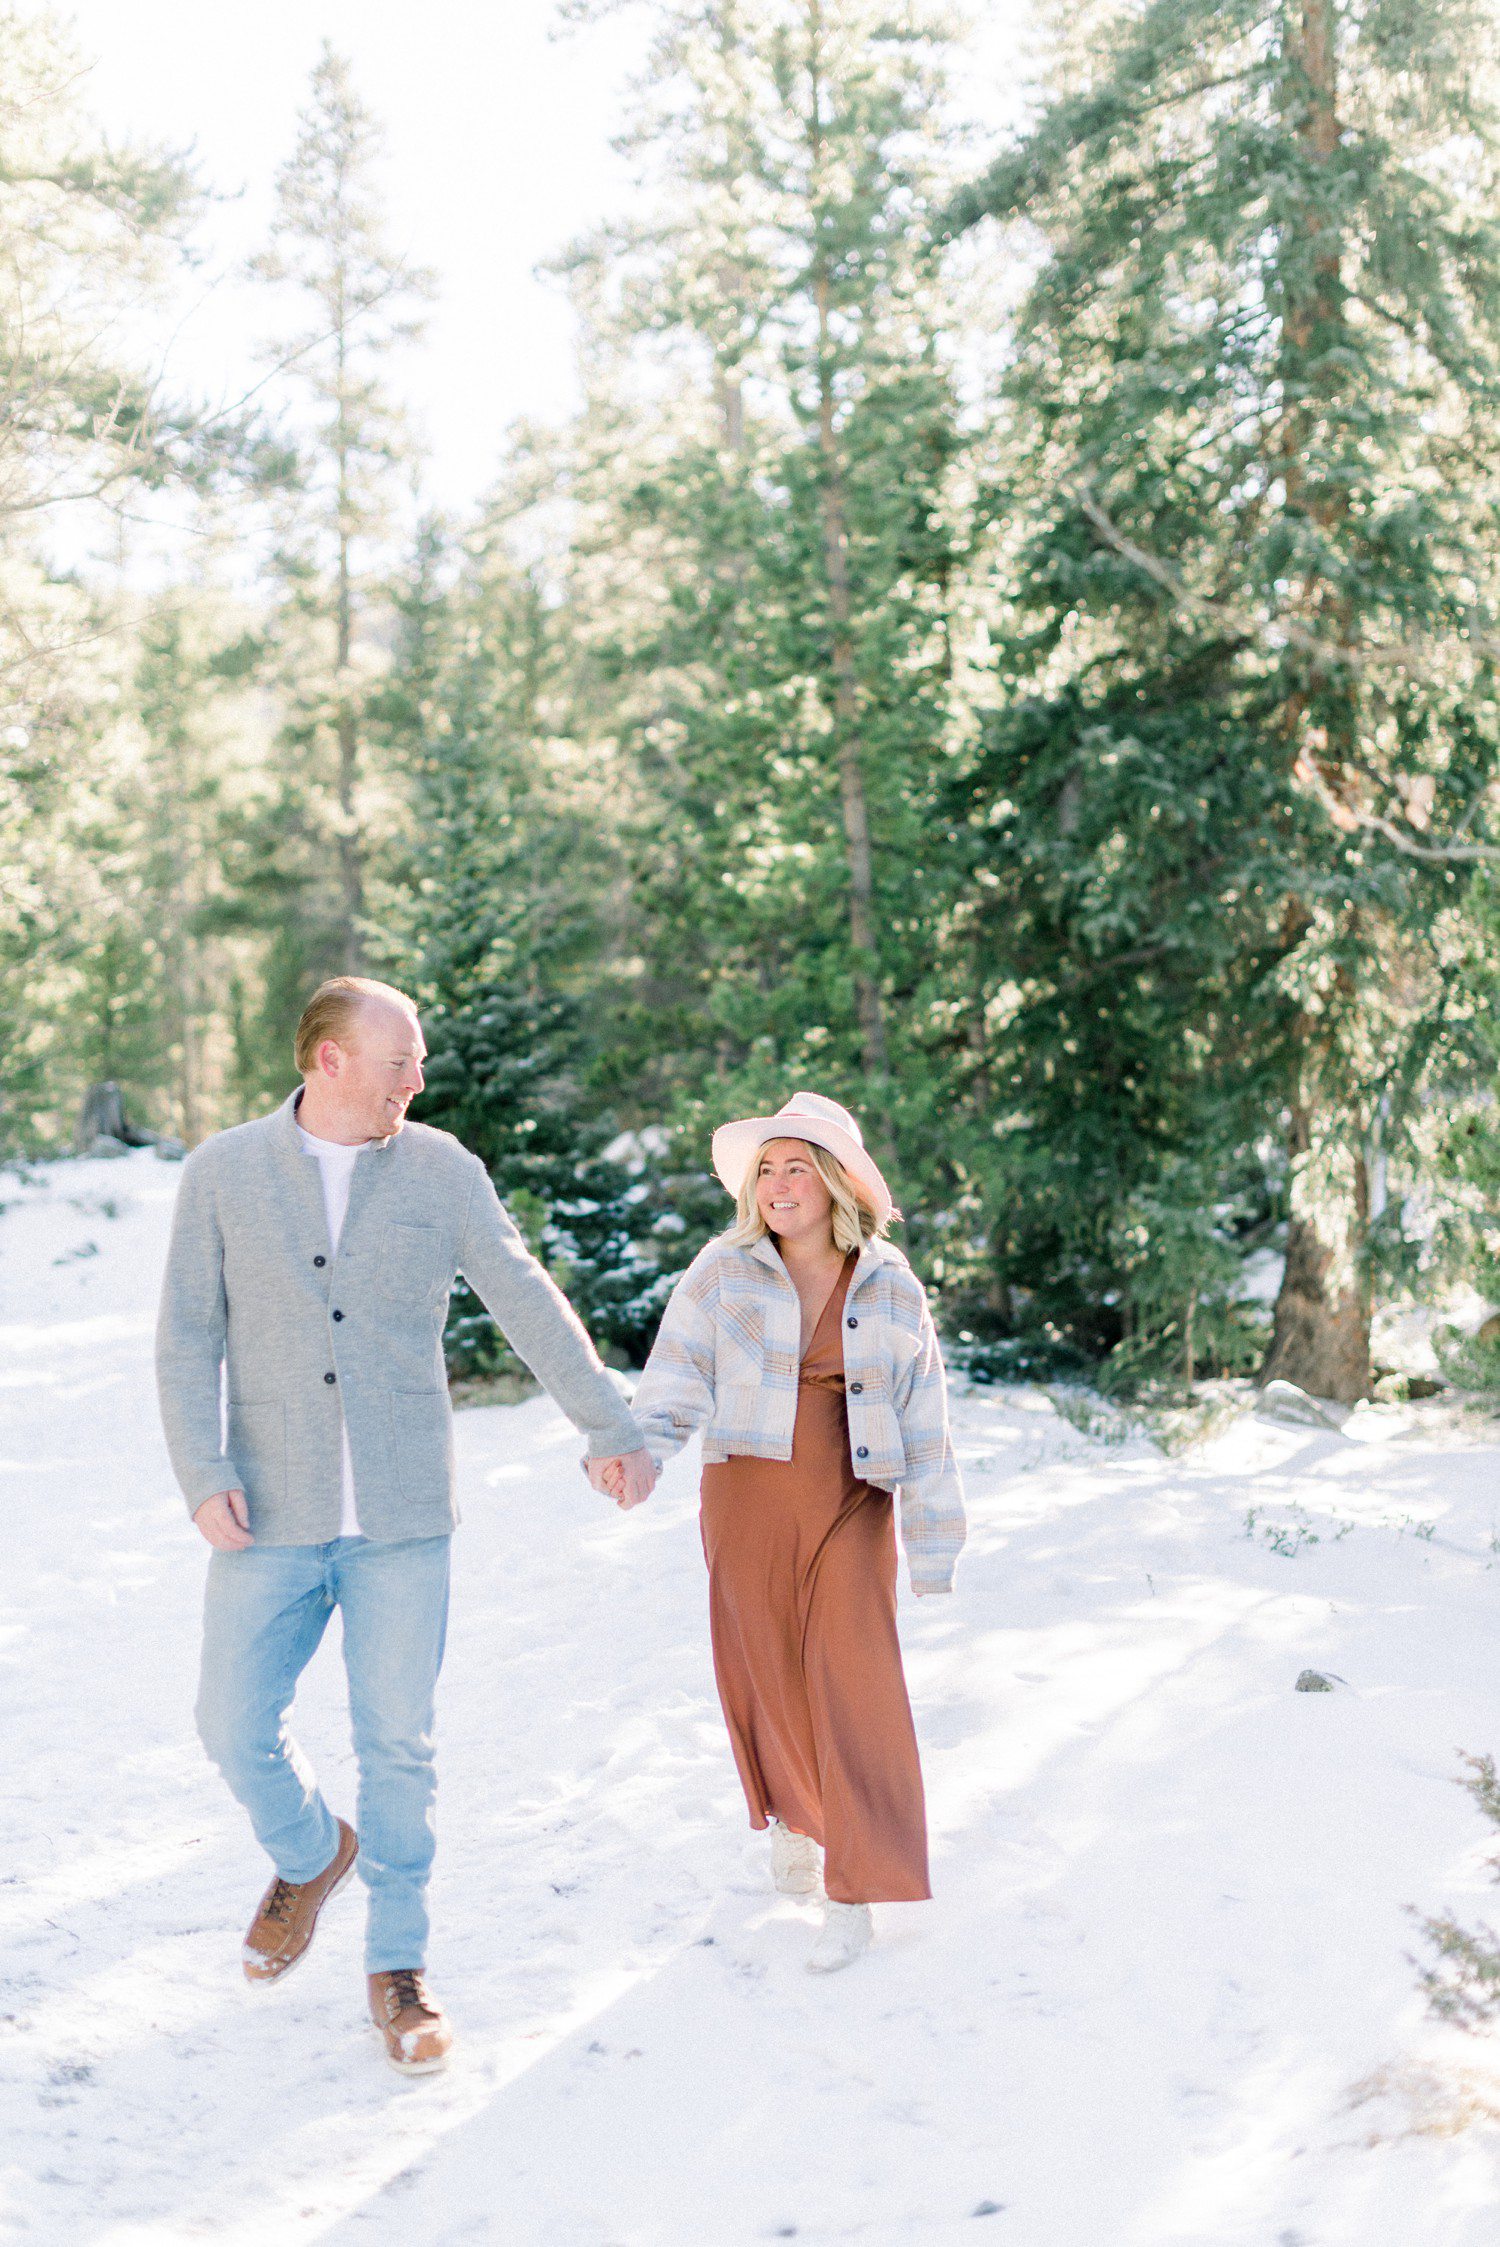 Walking engagement photos at Officer's Gulch near Vail, CO.